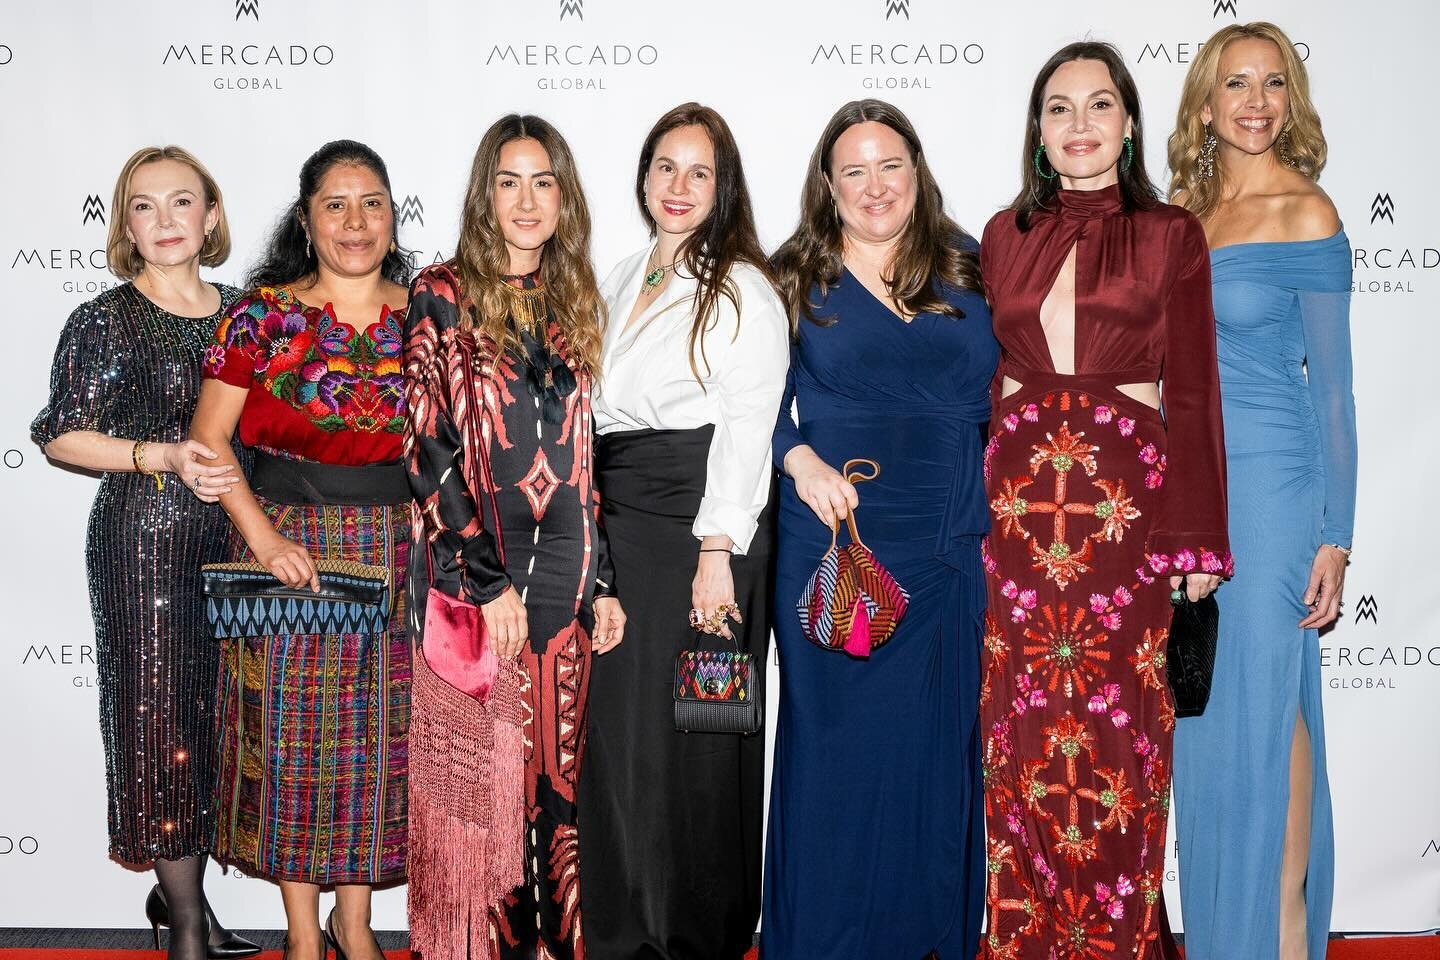 Delighted to have supported @mercadoglobal and their annual Fashion Forward Gala in celebration of International Women&rsquo;s Day and 20th anniversary of empowering women across the Americas. Congratulations to the honorees @johannaortizofficial @ma